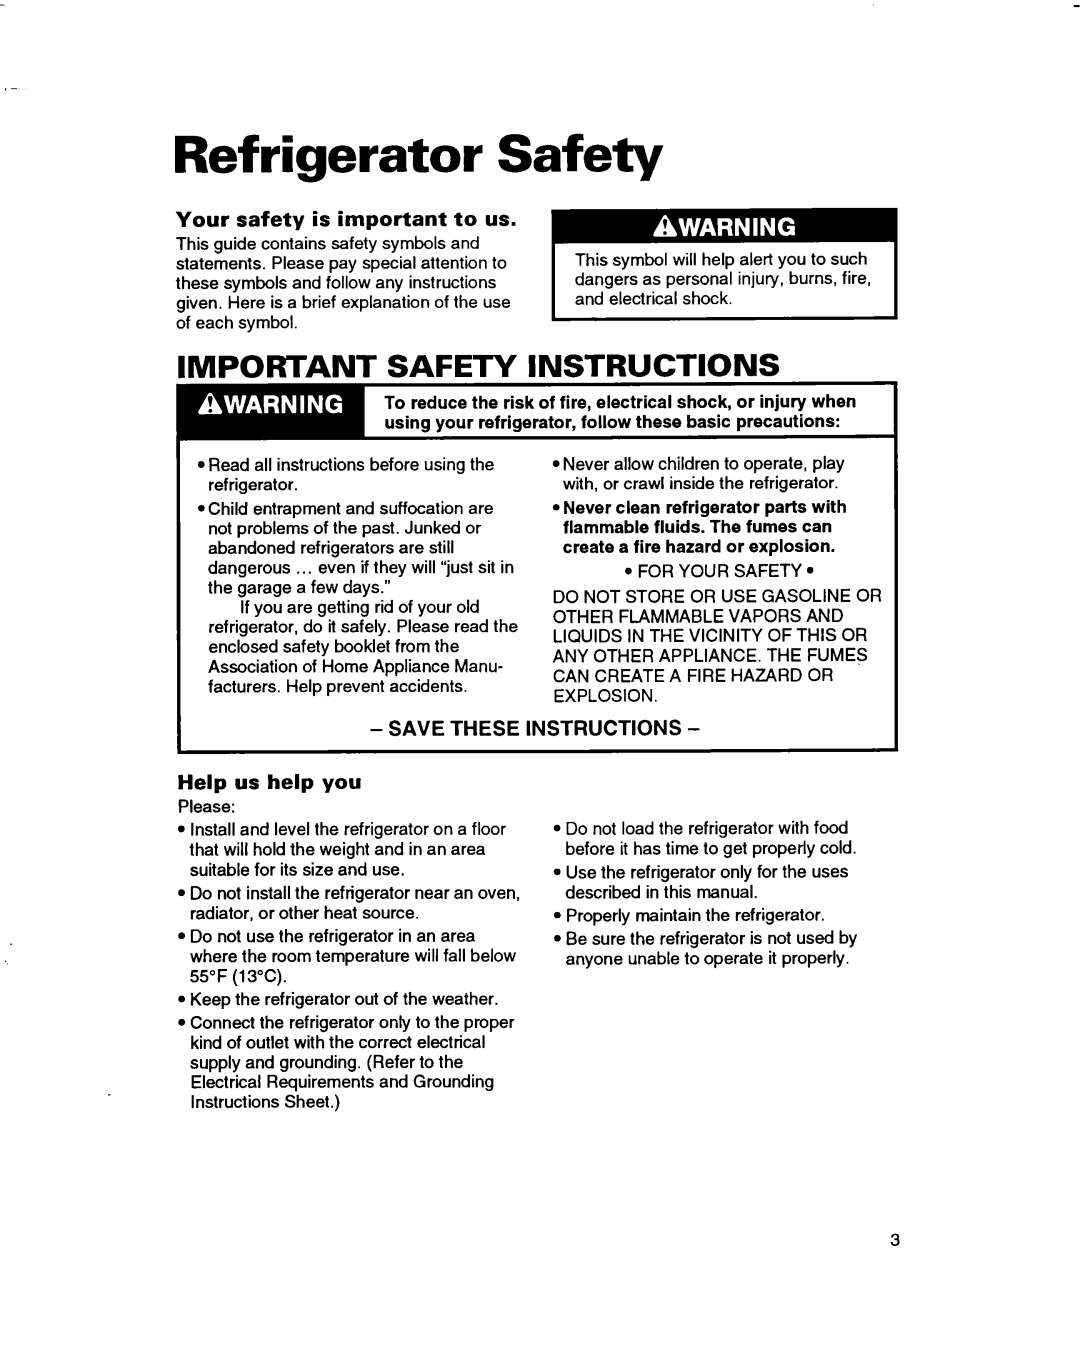 Whirlpool ET14JMXBN00 Refrigerator Safety, Save These Instructions, Your safety is important to us, Help us help you 